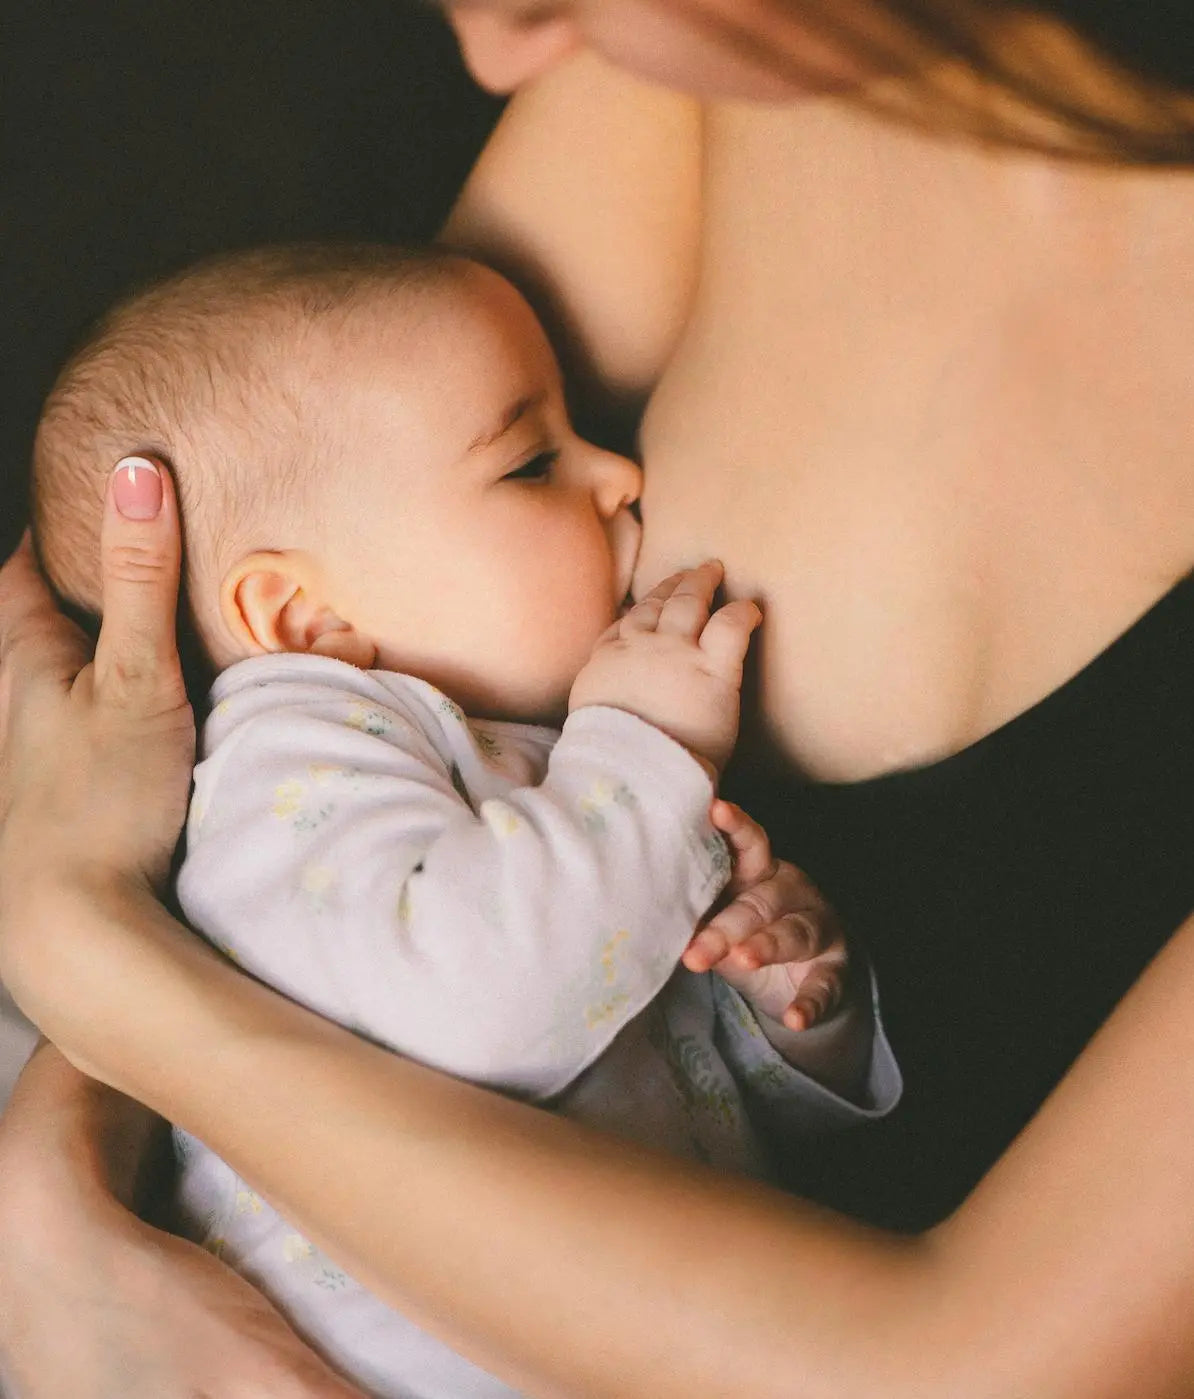 8 Pumping Essentials For Nurses Who Breastfeed - Mother Nurse Love